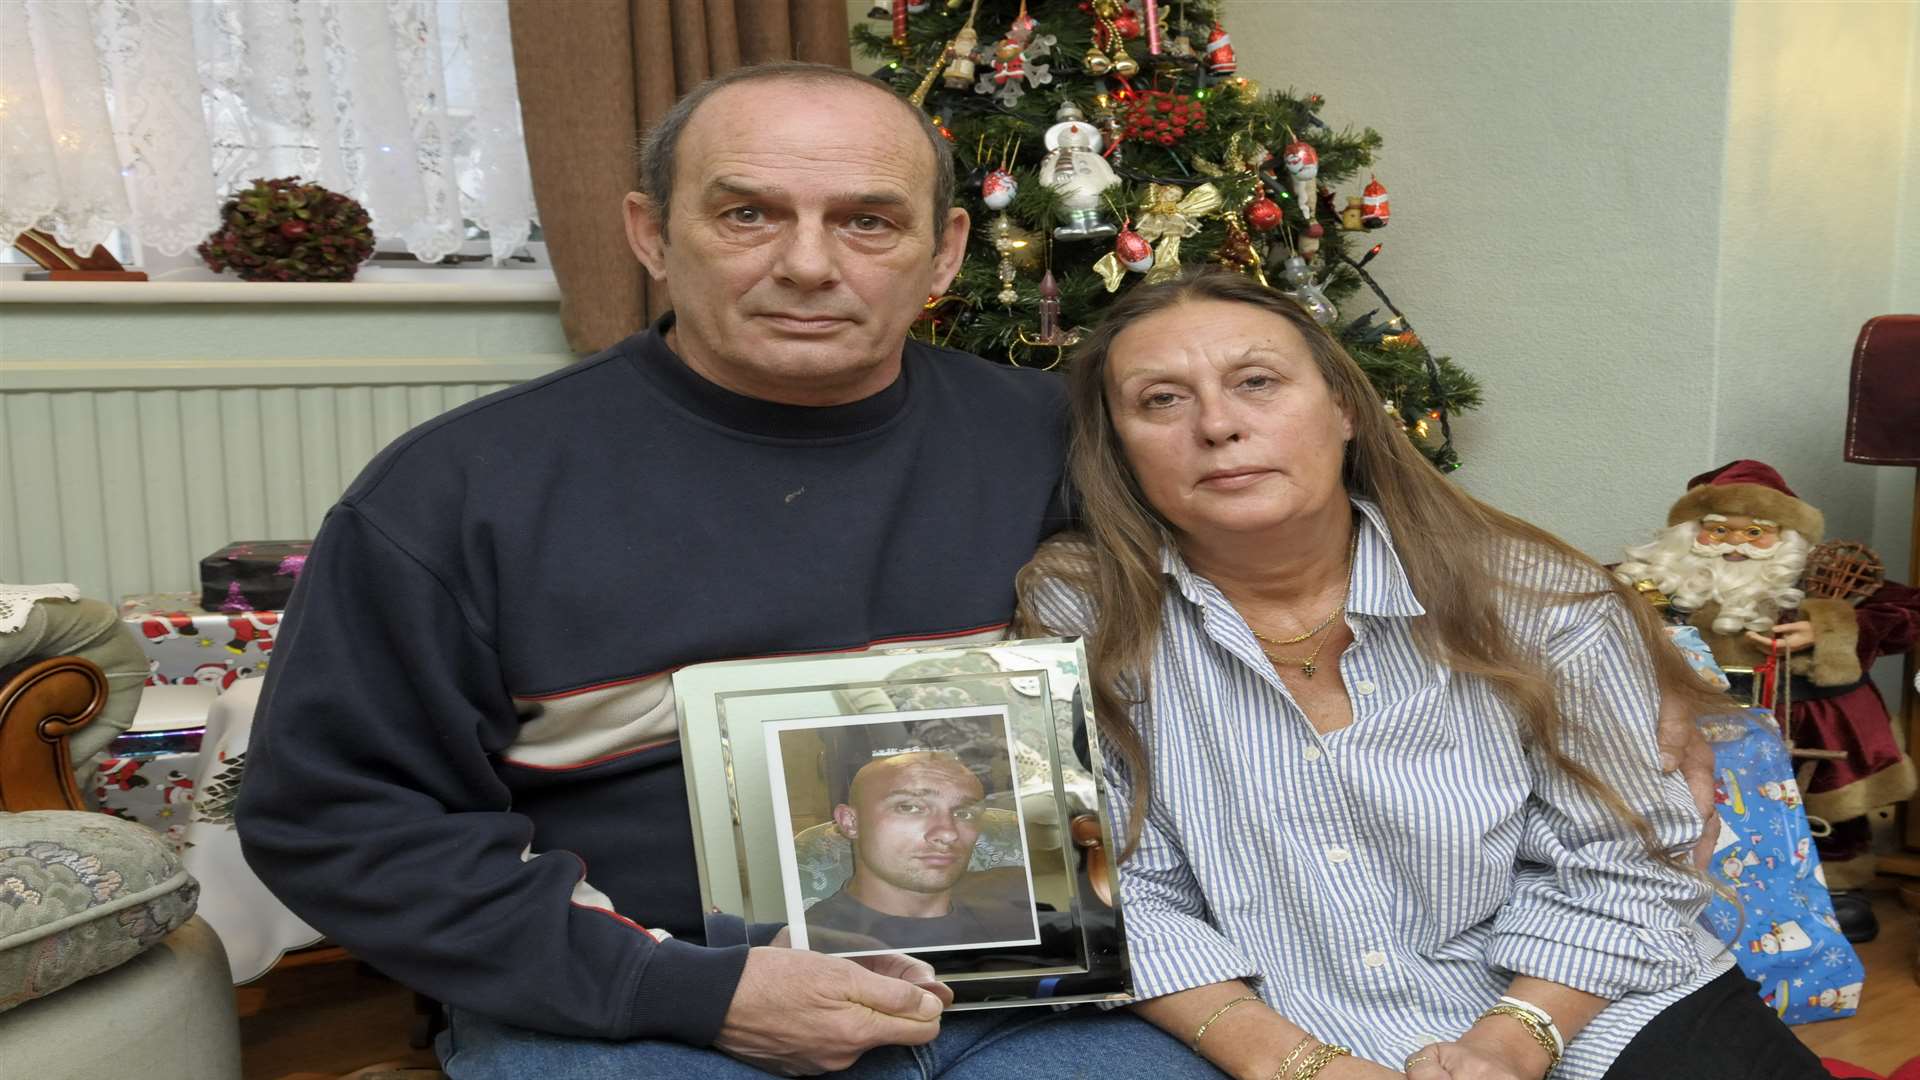 Jim and Pauline Green in their missing son's bedroom at Christmas